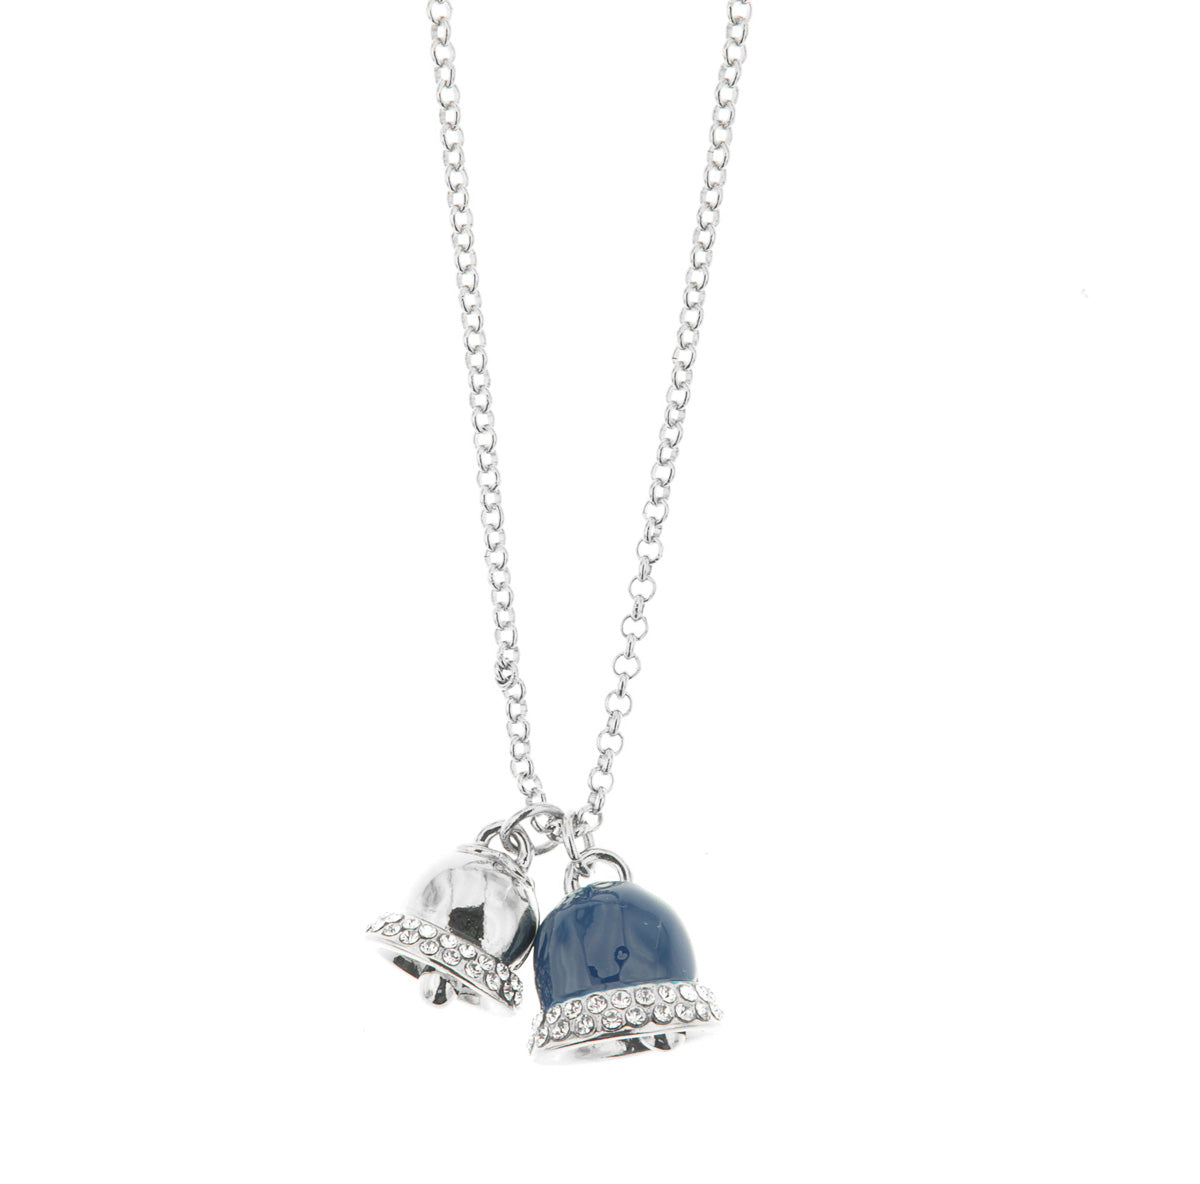 Metal necklace with blue enamel billes and embellished with white crystals